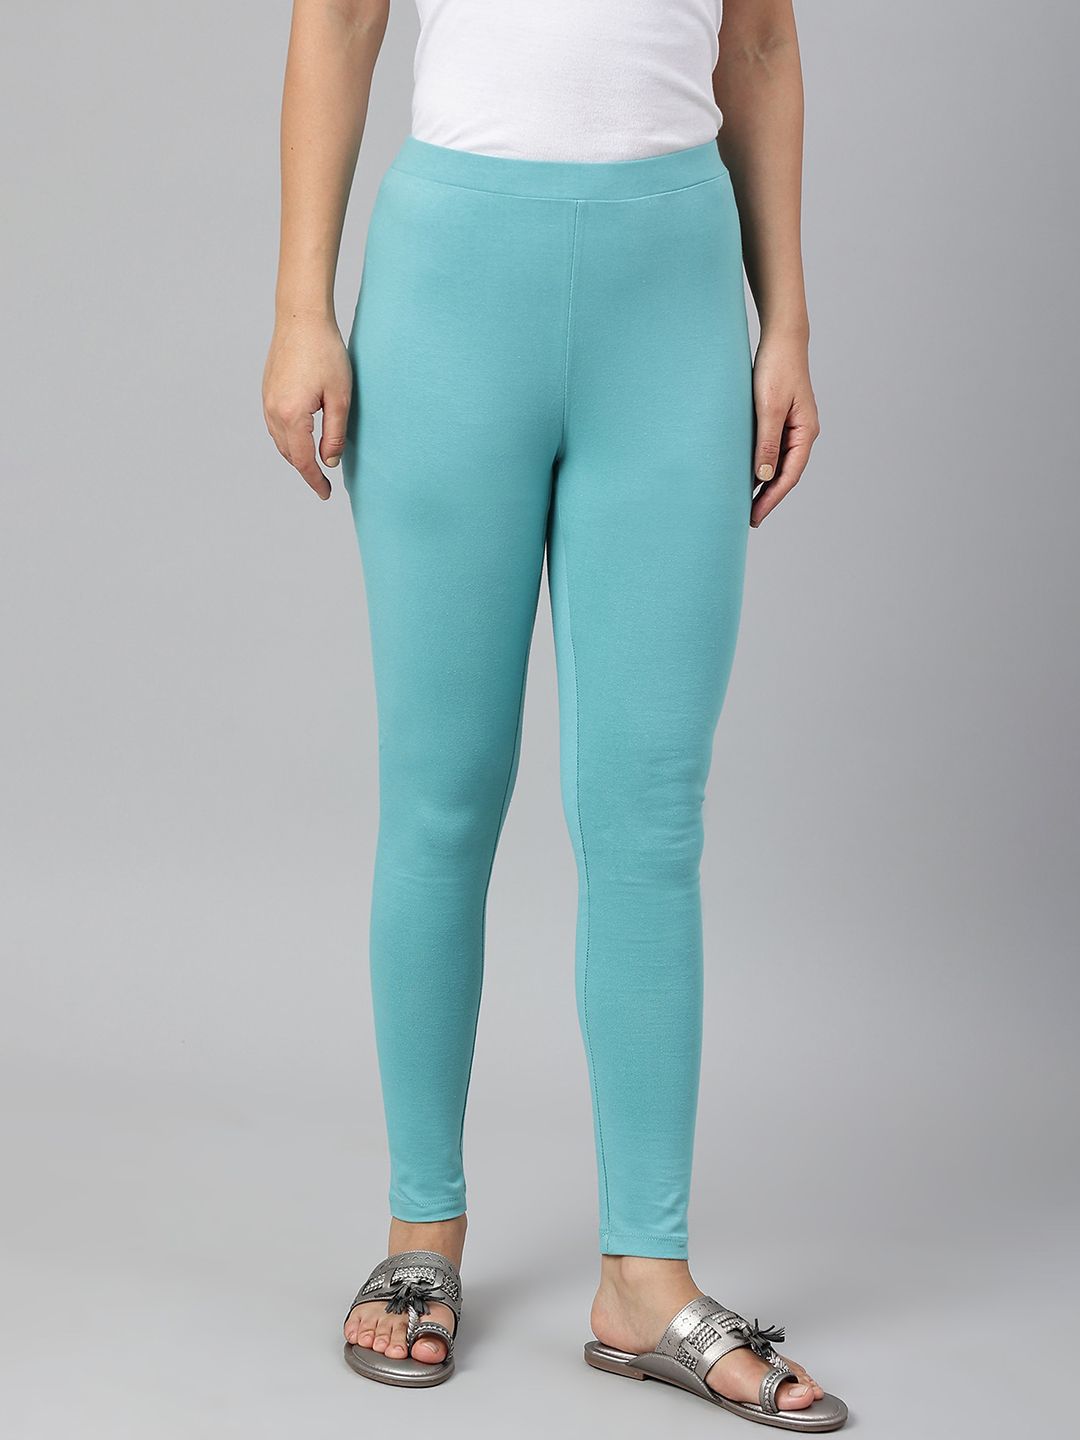 W Women Blue Solid Ankle-Length Leggings Price in India